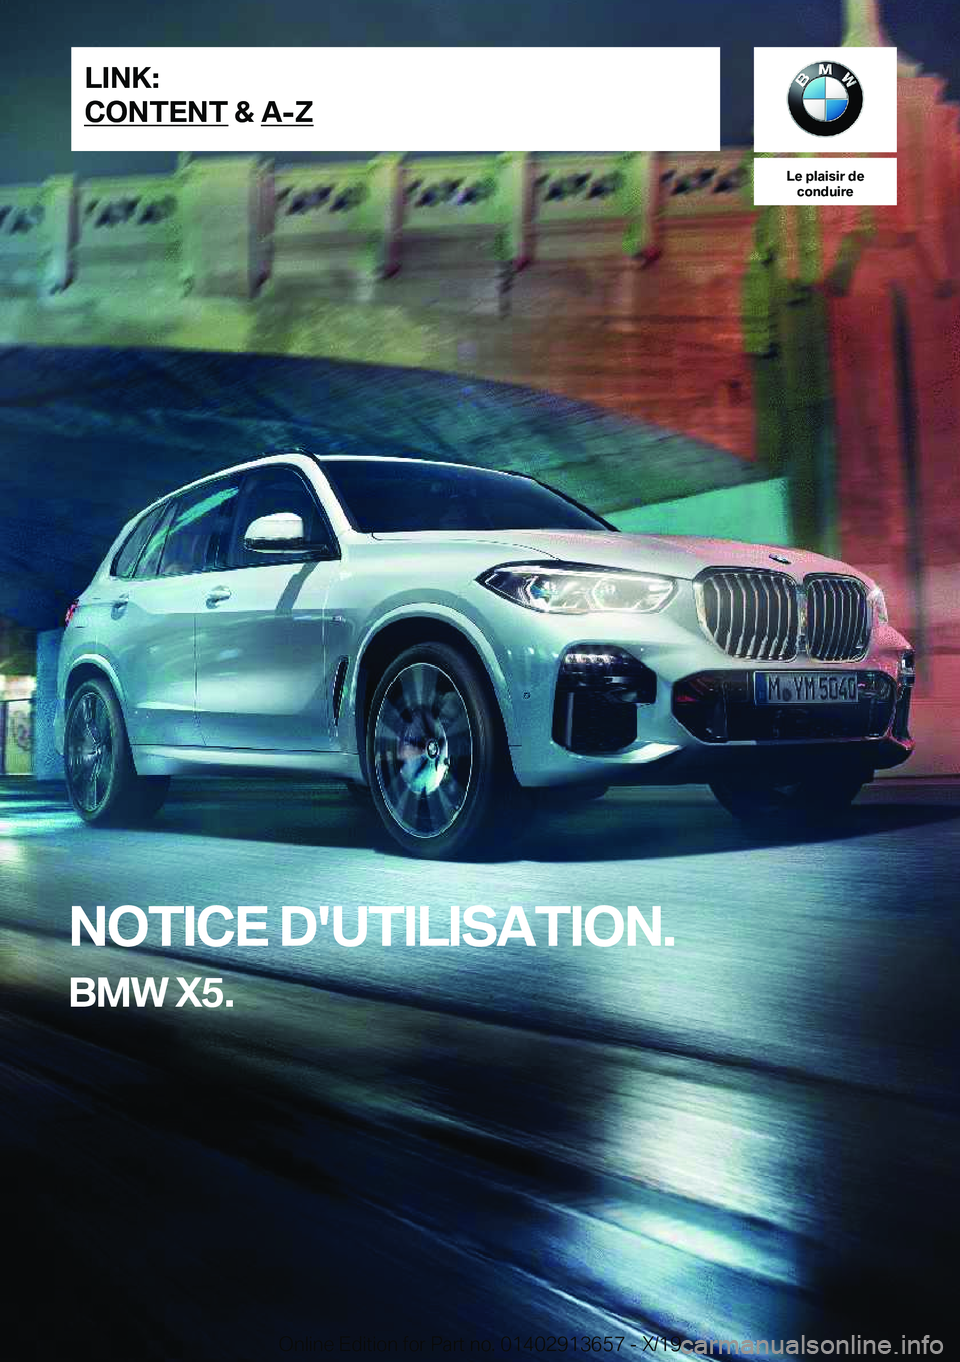 BMW X5 2020  Notices Demploi (in French) �L�e��p�l�a�i�s�i�r��d�e�c�o�n�d�u�i�r�e
�N�O�T�I�C�E��D�'�U�T�I�L�I�S�A�T�I�O�N�.
�B�M�W��X�5�.�L�I�N�K�:
�C�O�N�T�E�N�T��&��A�-�Z�O�n�l�i�n�e��E�d�i�t�i�o�n��f�o�r��P�a�r�t��n�o�.��0�